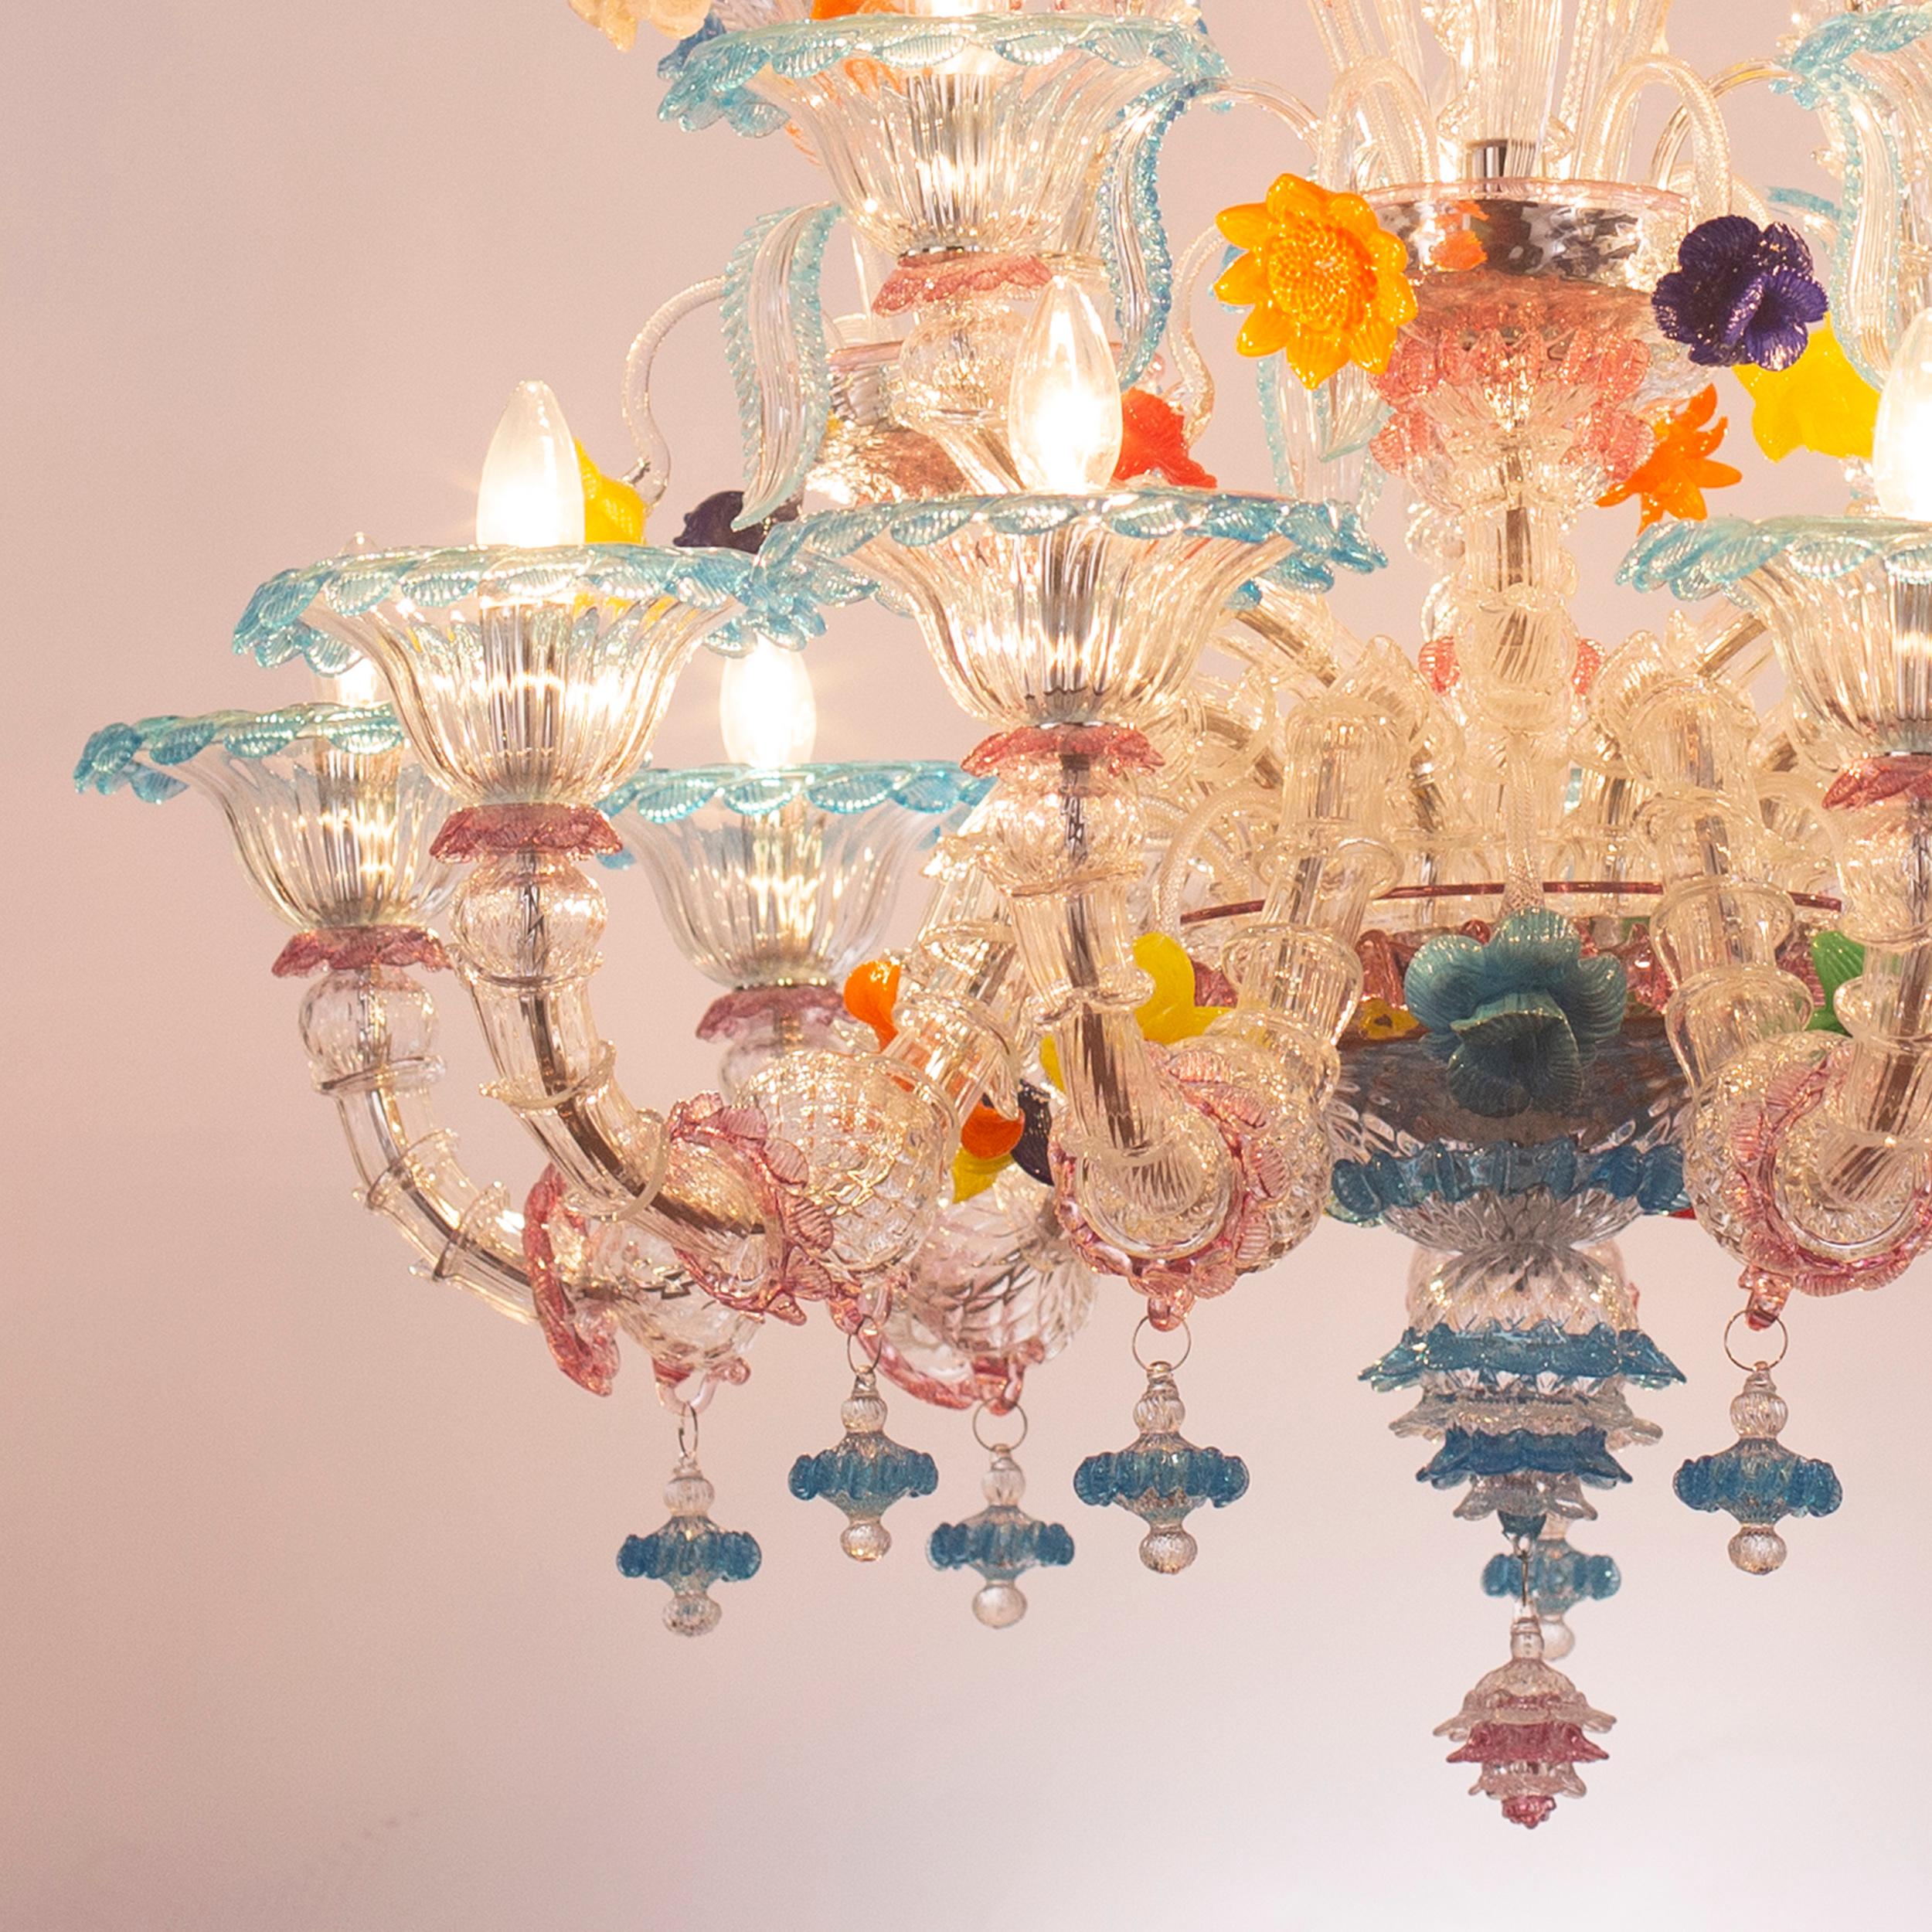 Rich Rezzonico Chandelier 15arms Clear-multicolored Murano Glass by Multiforme
.
This chandelier is the combination of the traditional Venetian structure with gaudy colors. A peculiar lighting works, lively and exuberant.
This is a Ca’ Rezzonico